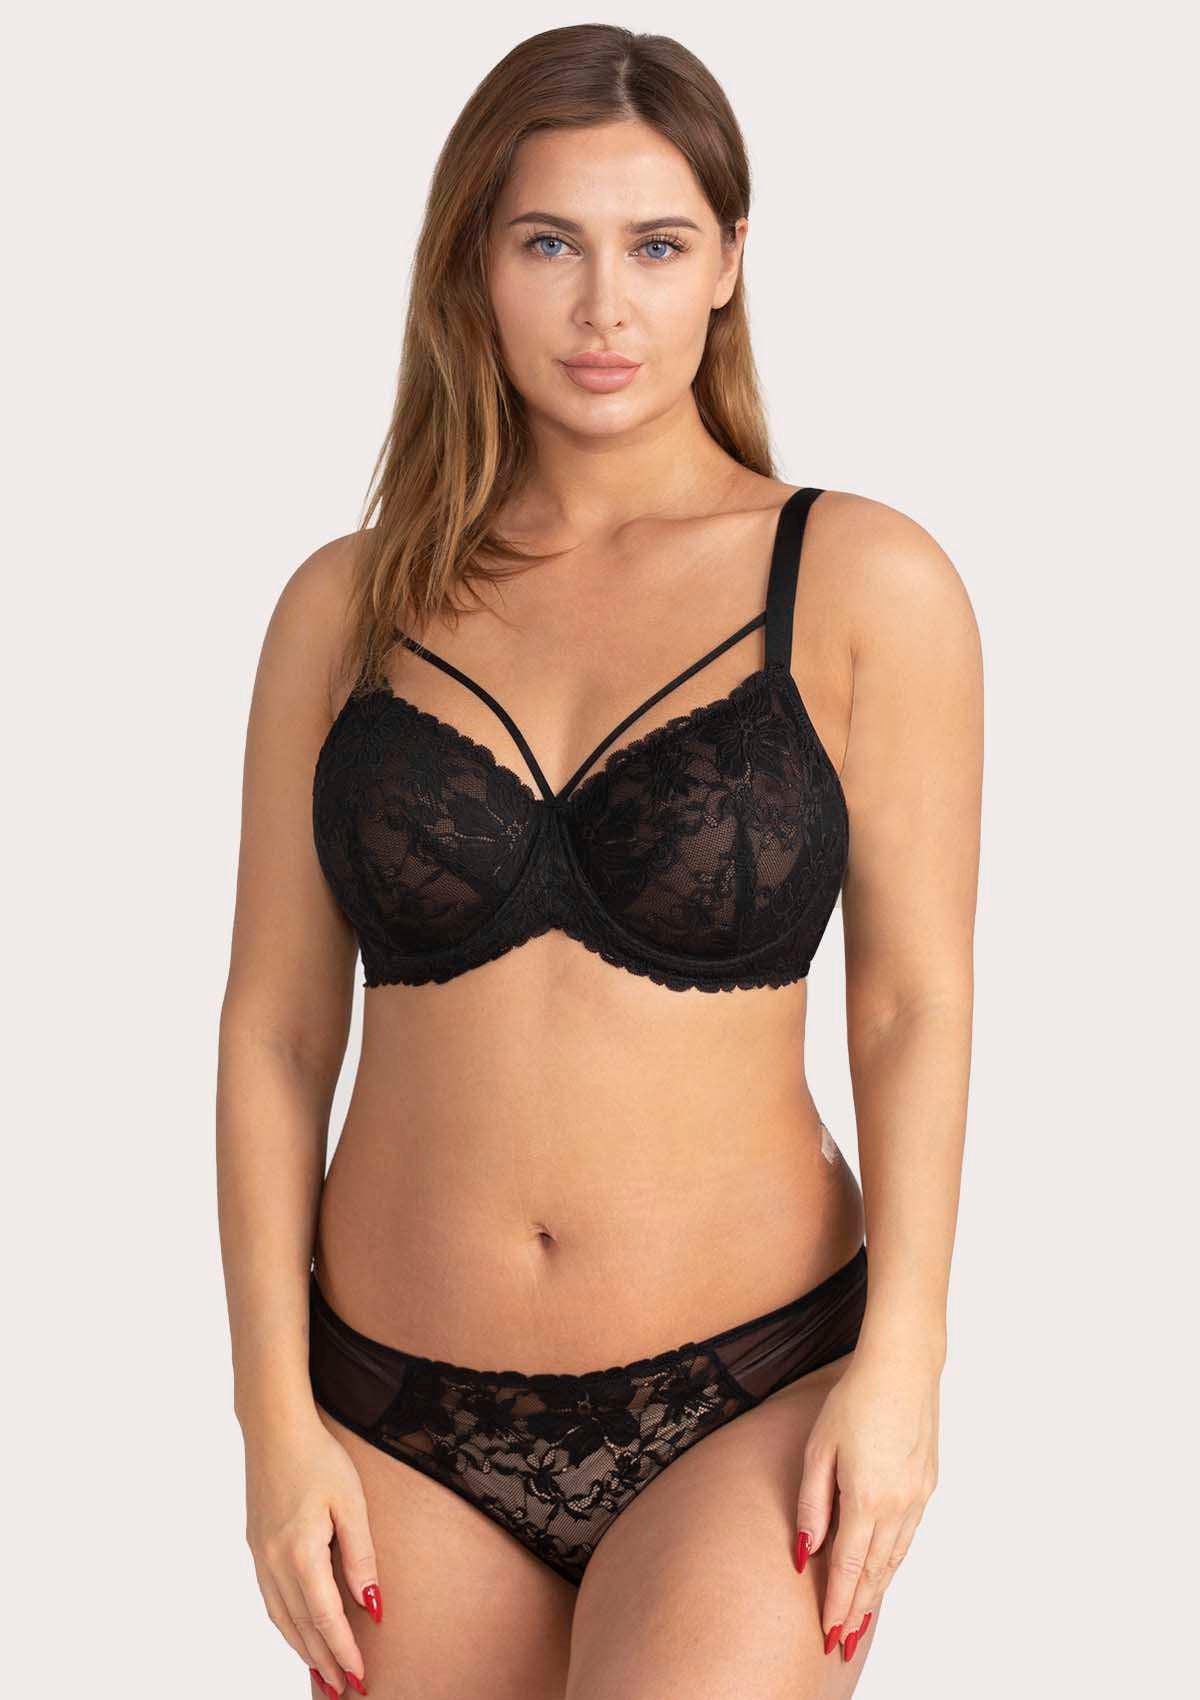 HSIA Pretty In Petals Lace Bra And Panty Set: Non Padded Wired Bra - Black / 36 / DDD/F